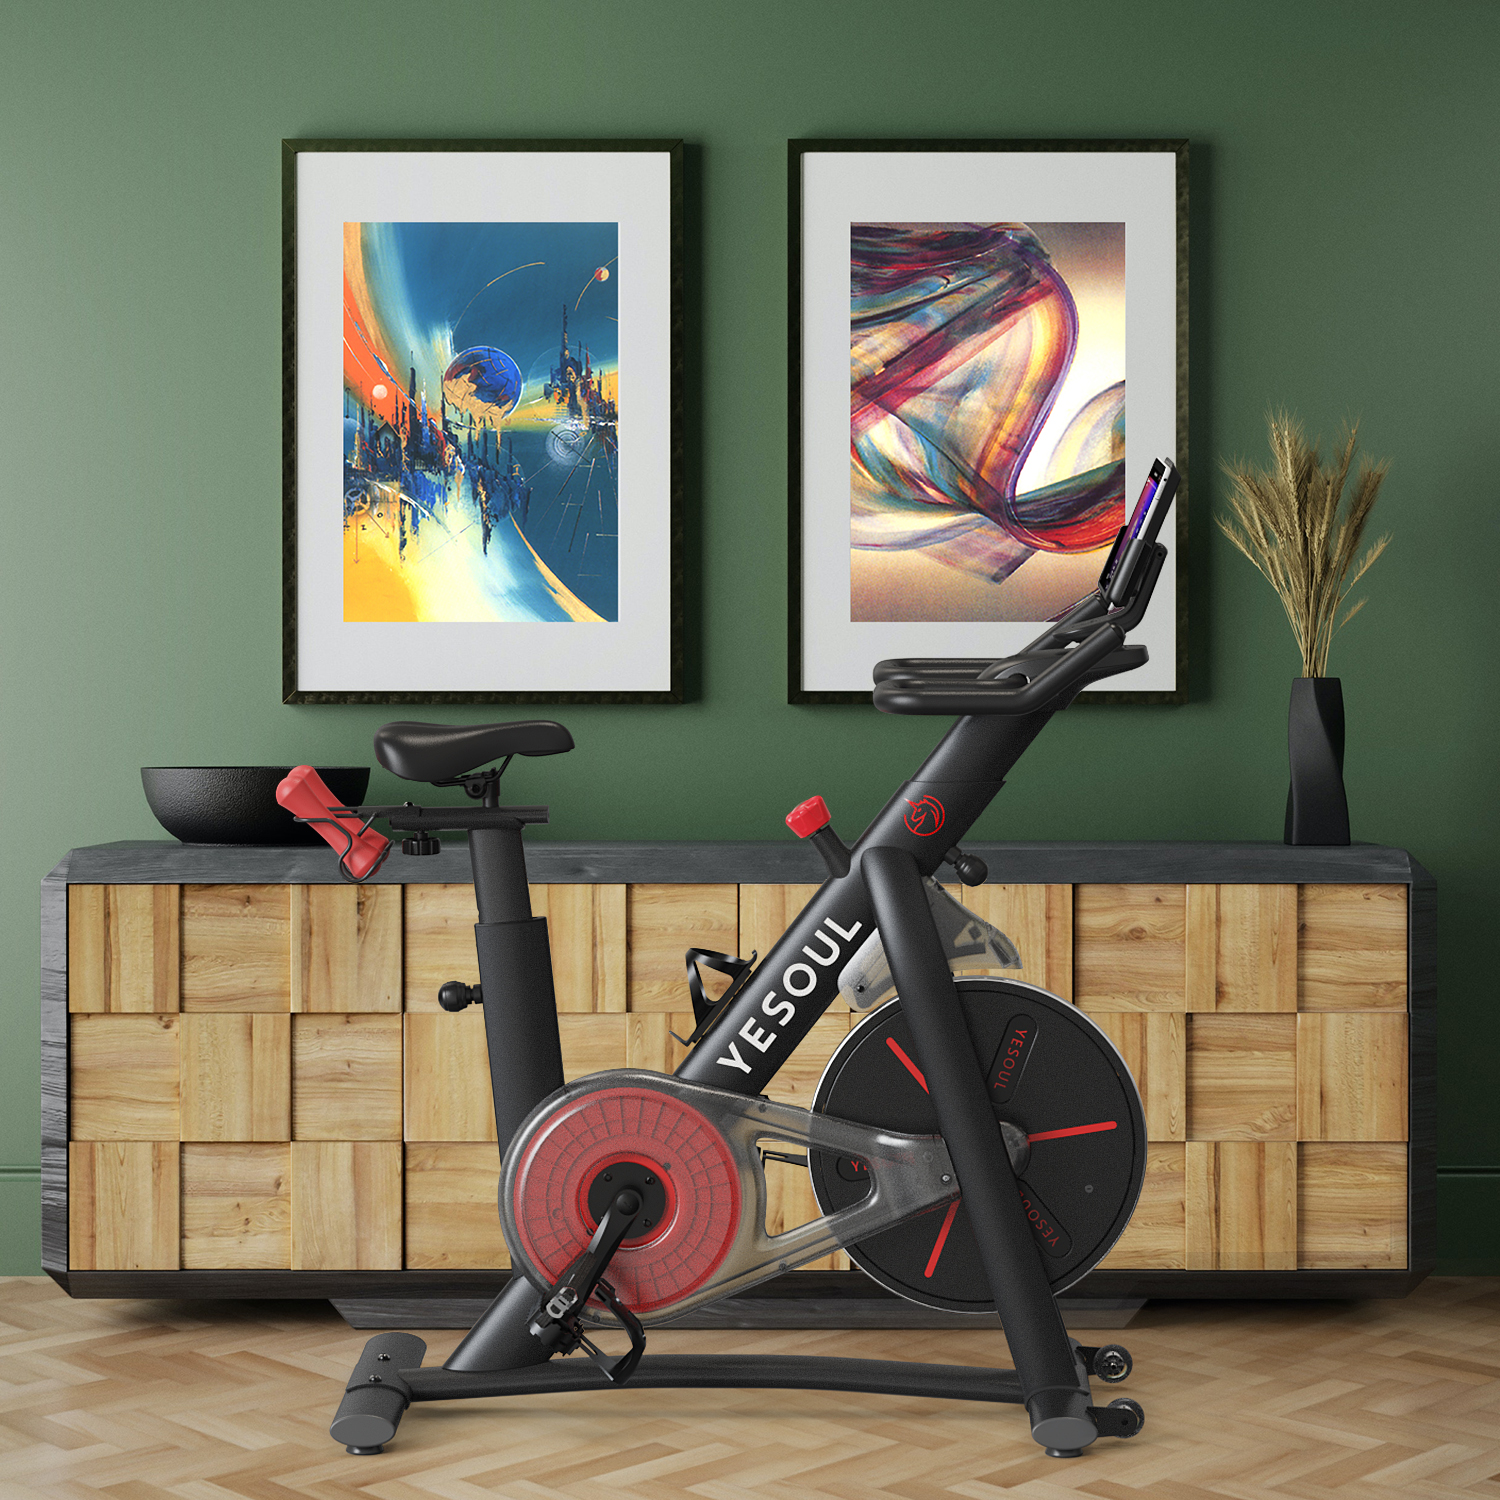 YESOUL G1 Series Exercise Bikes Touted As The Best Smart Home Fitness Bikes On The Market